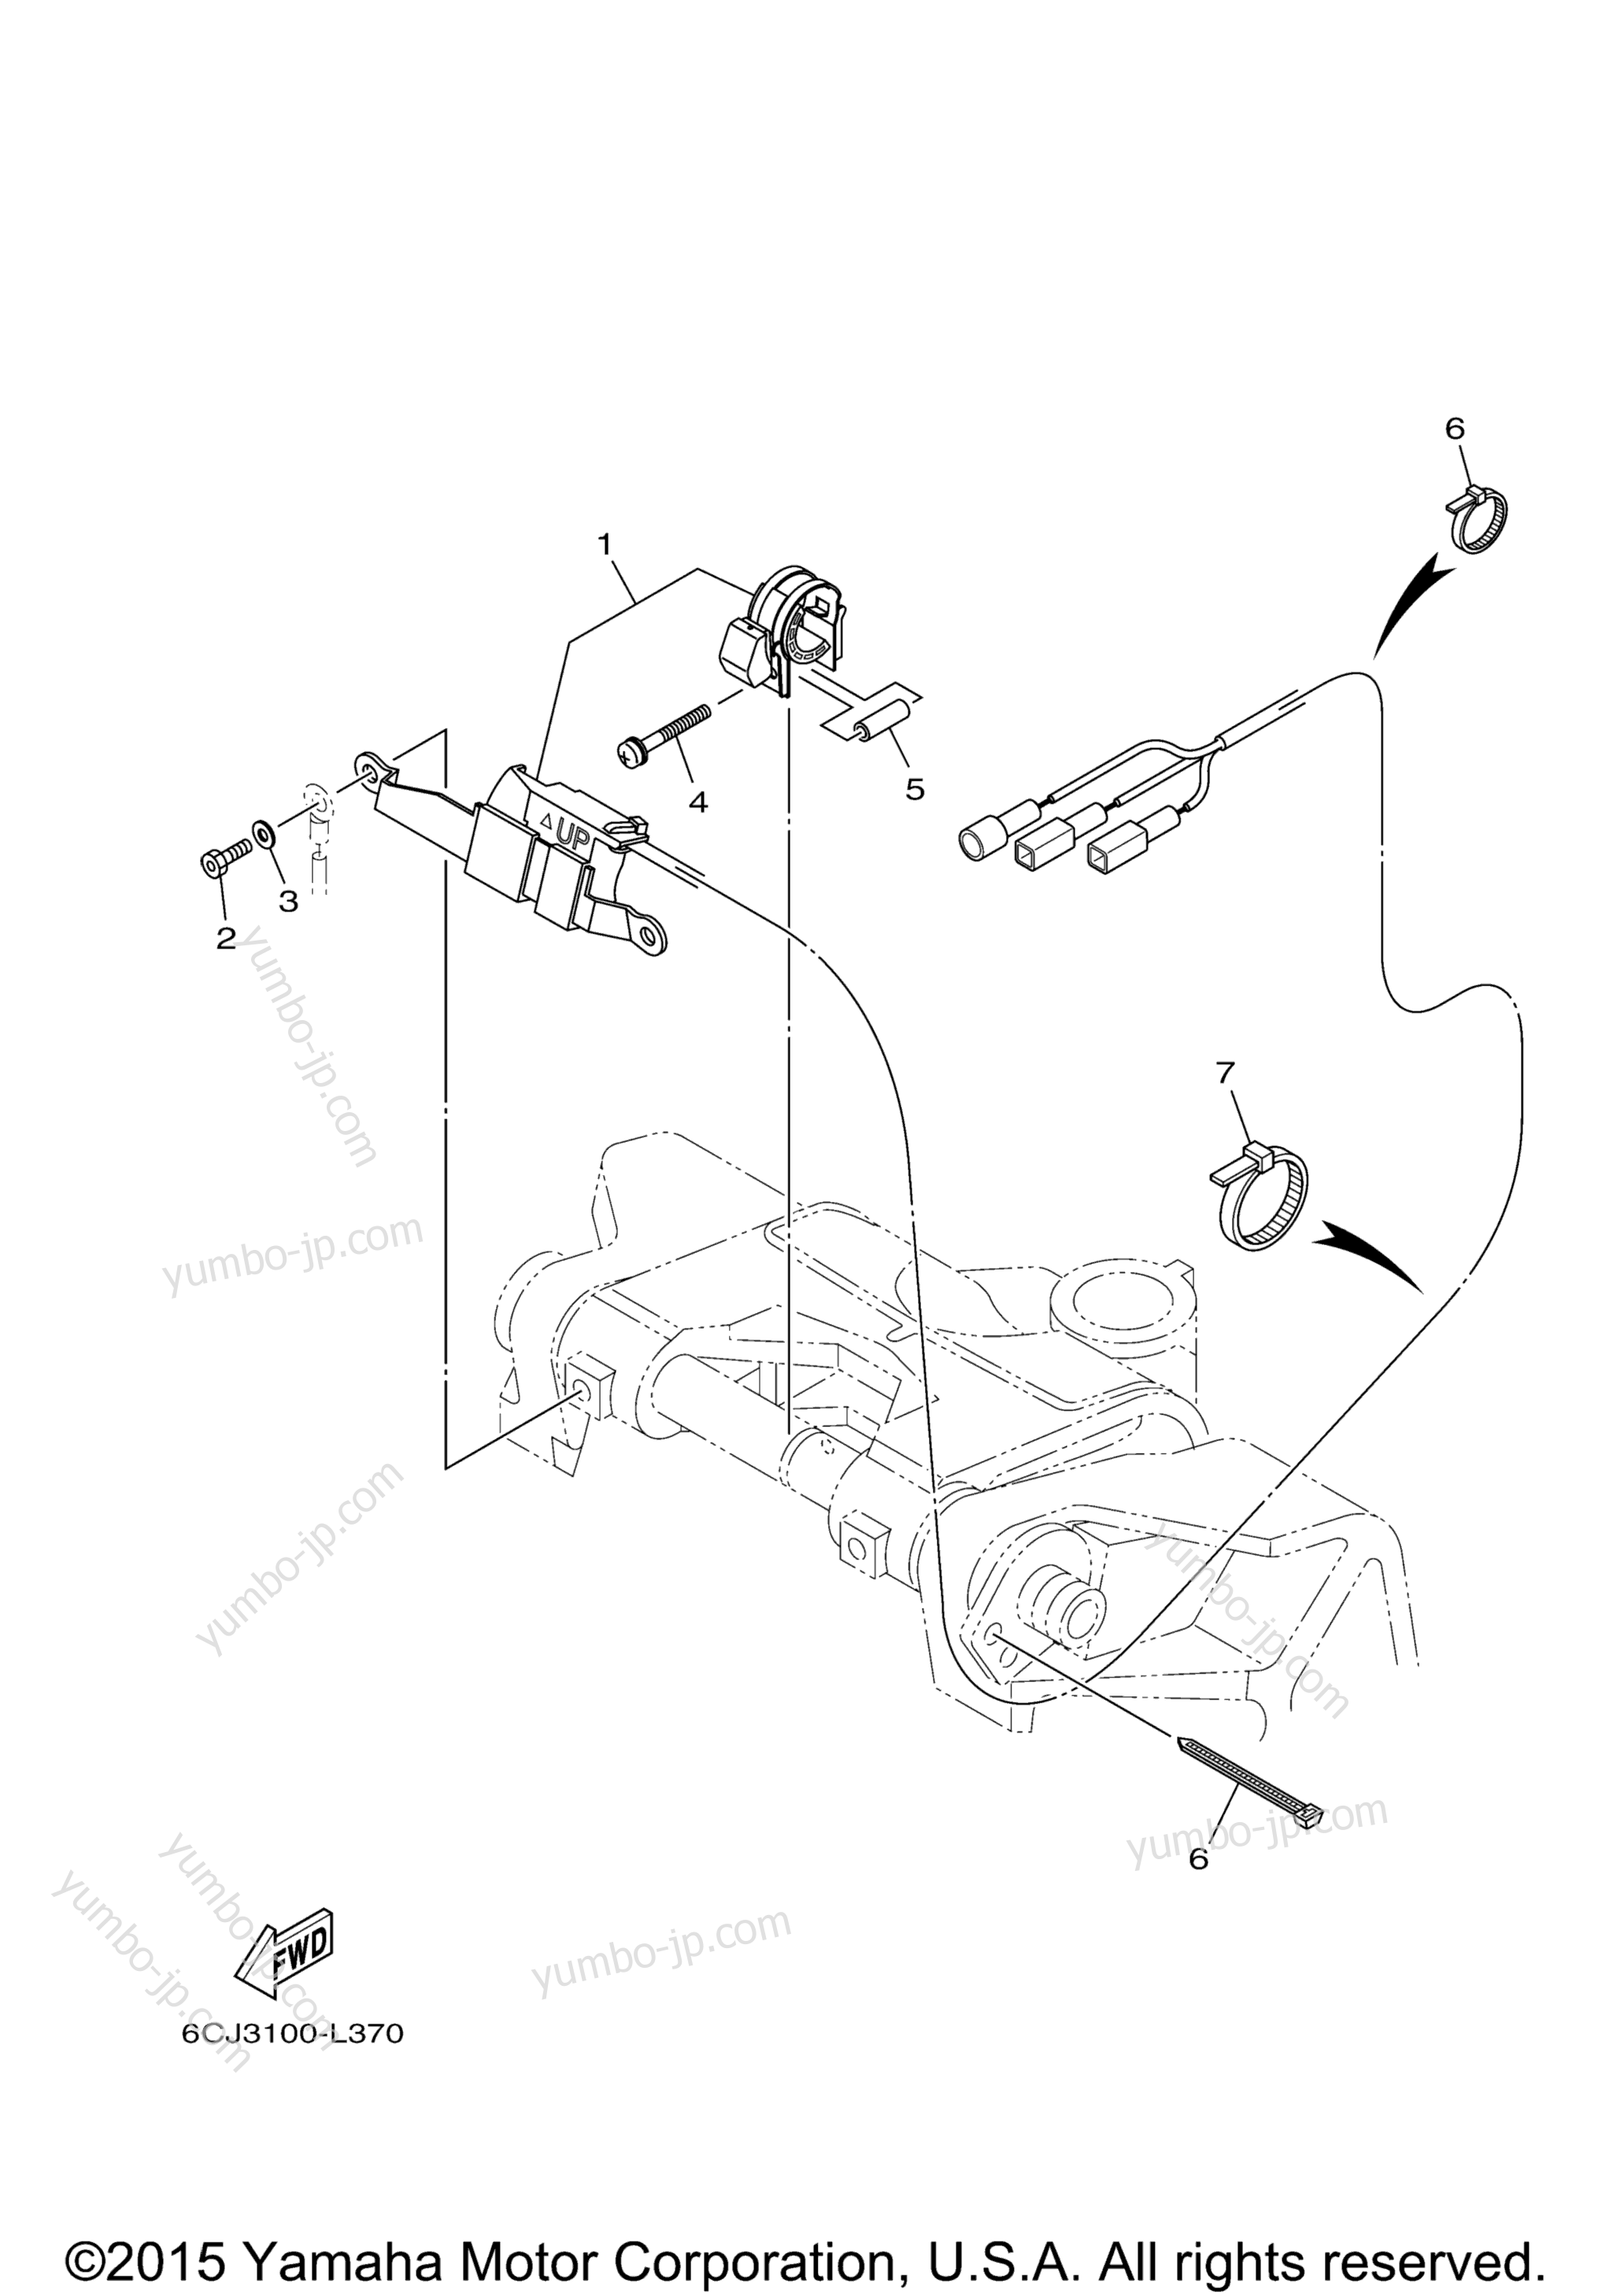 Optional Parts 2 for outboards YAMAHA F60JB (0115) 2006 year